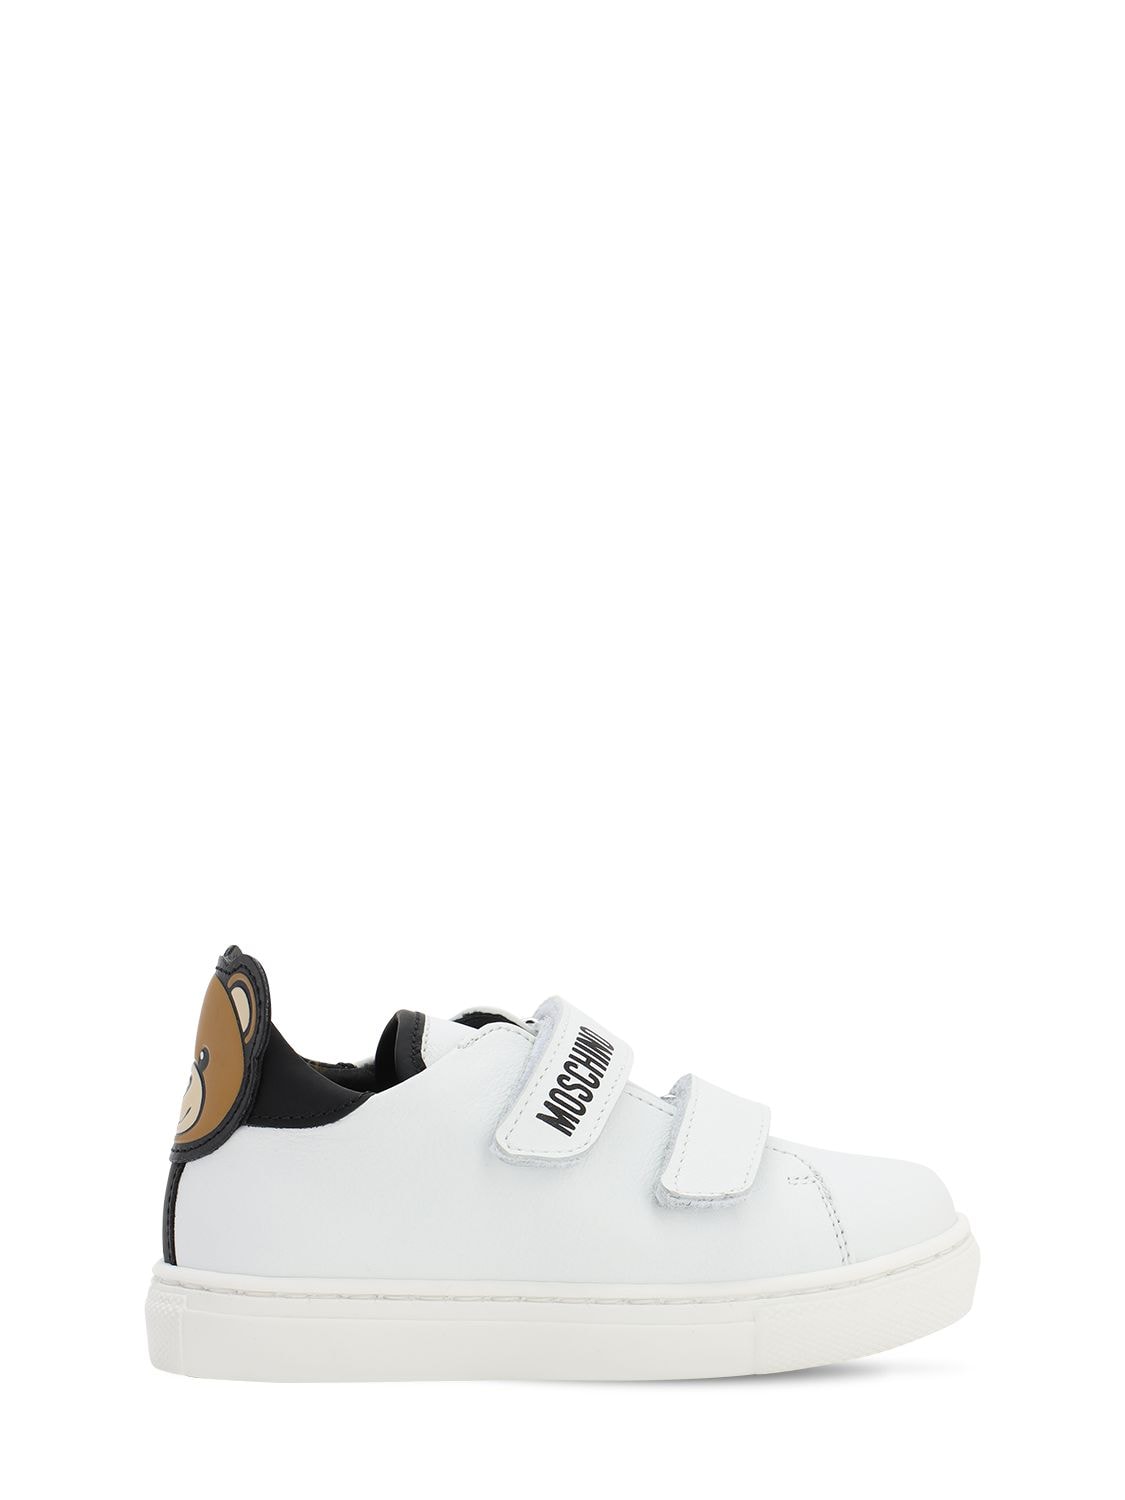 MOSCHINO LEATHER STRAP trainers W/ PATCH,71ILXF012-VKFSIDE1